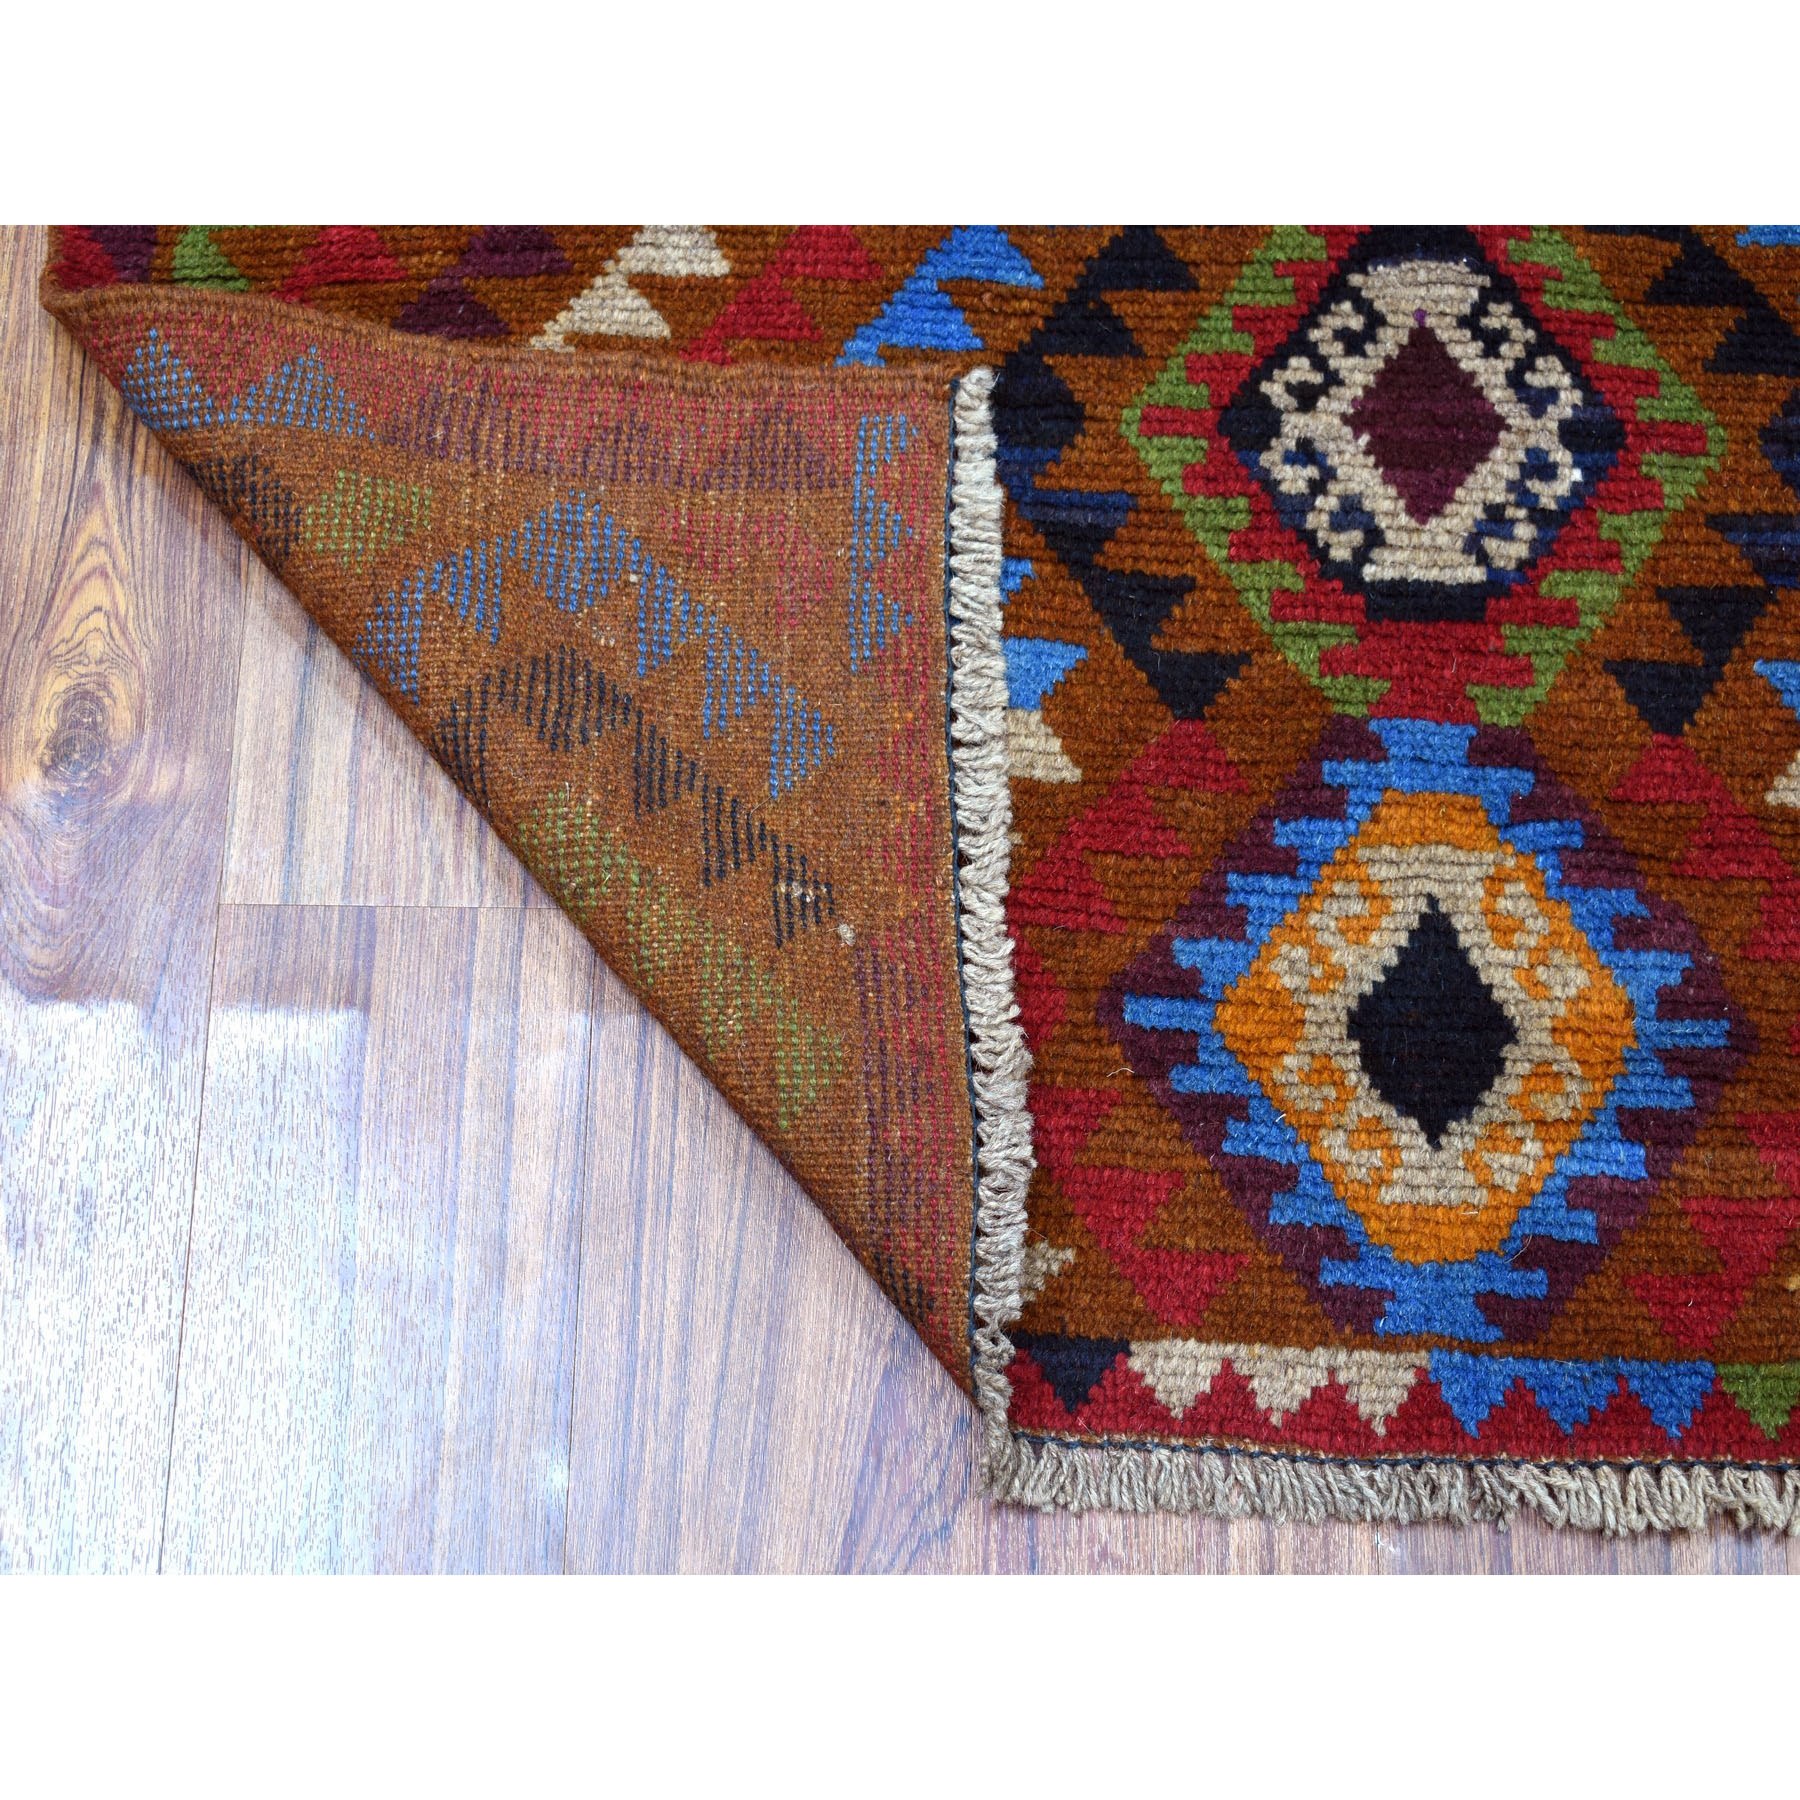 3'9"x6' Brown Hand Woven Colorful Afghan Baluch Geometric Design Pure Wool Oriental Rug 